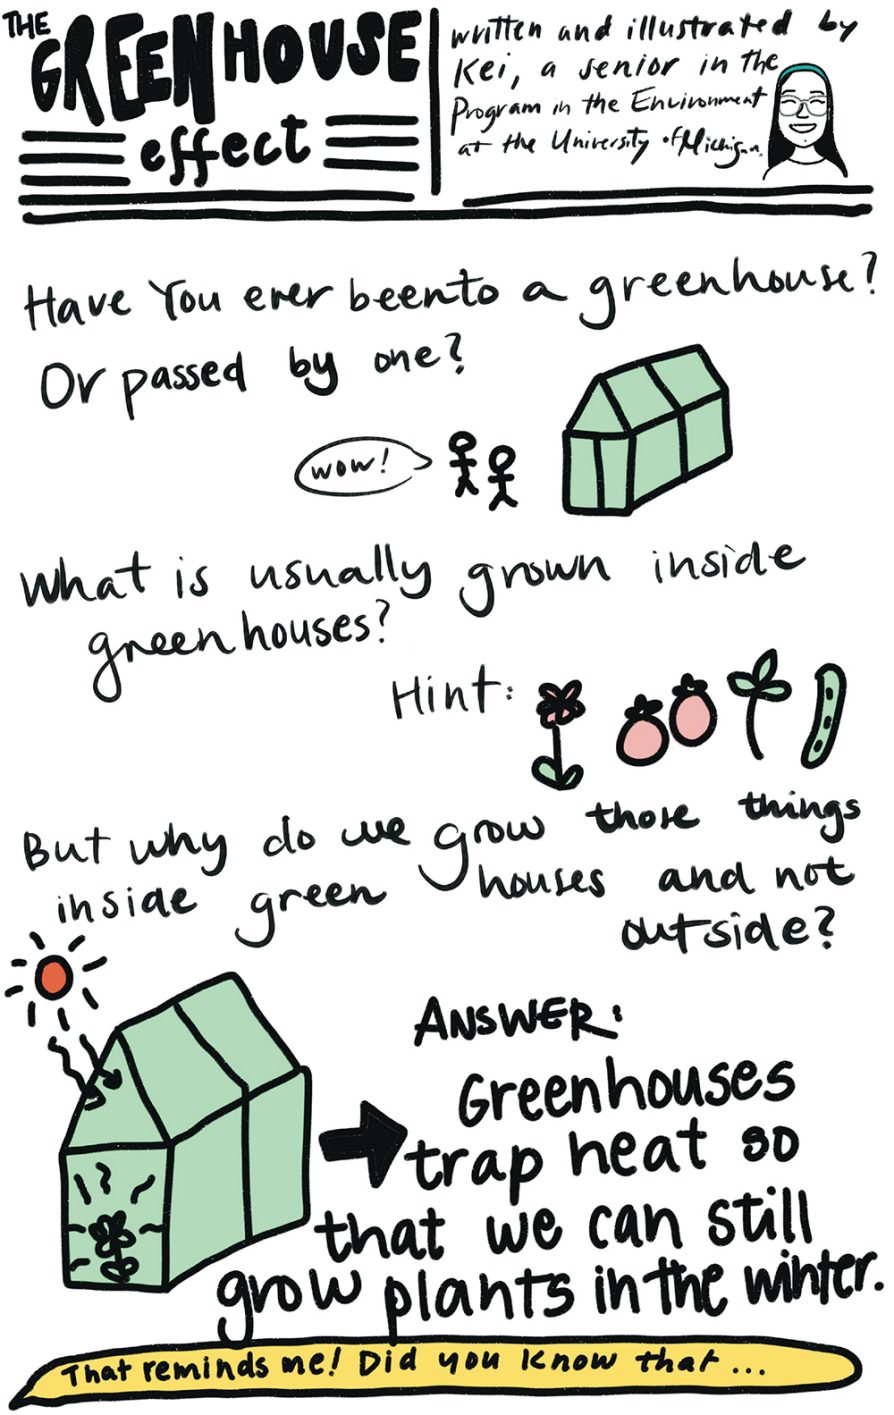 The Greenhouse Effect poster